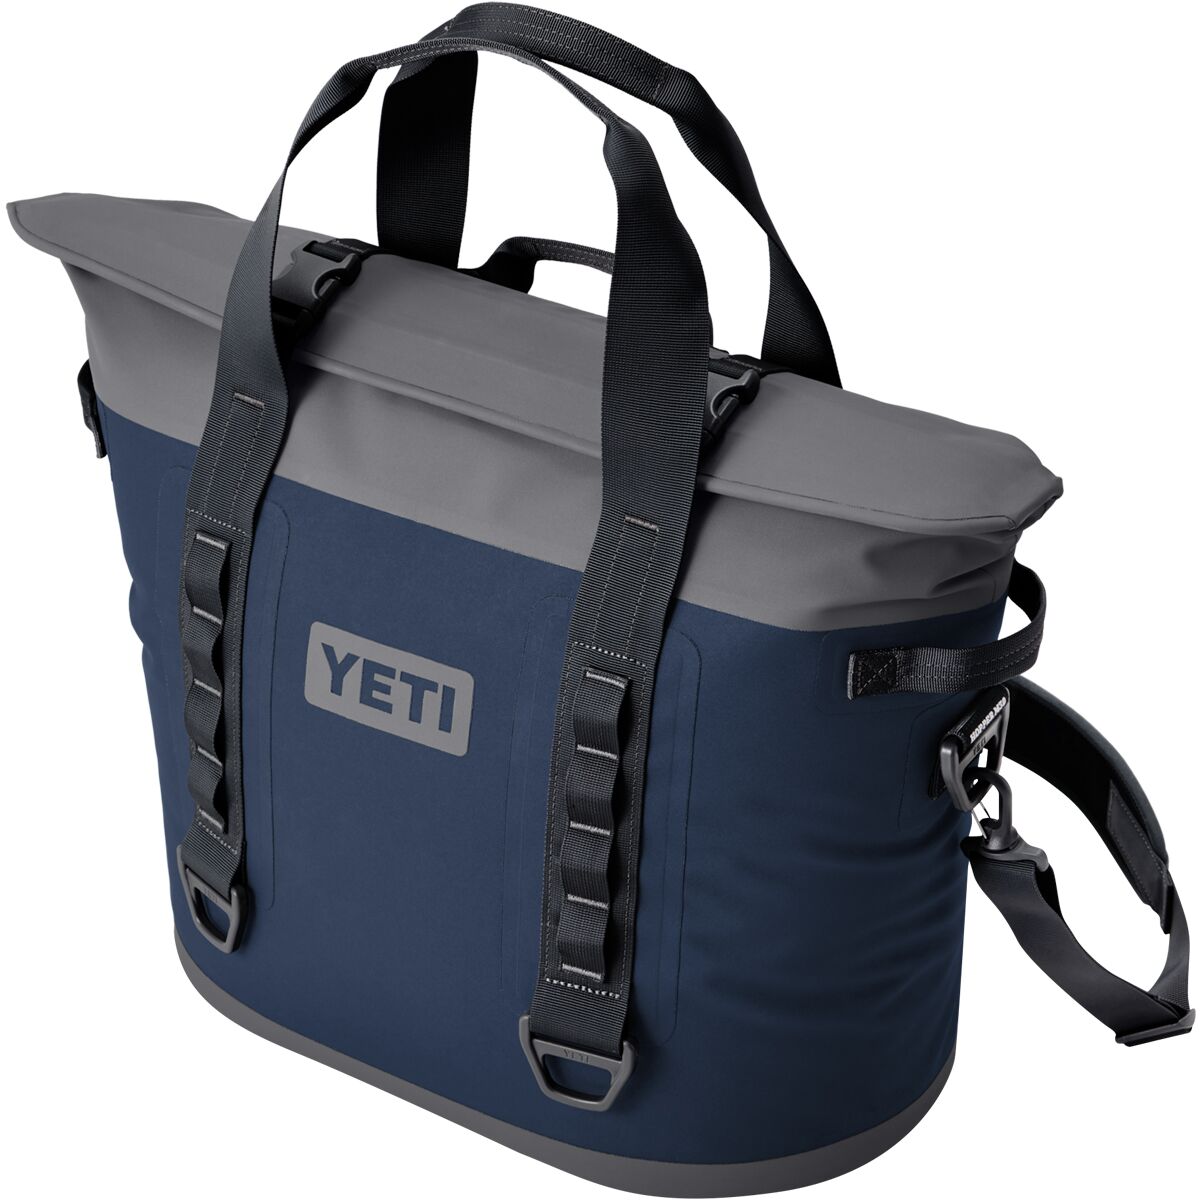 Yeti Hopper M30 Review 2020: Durable Soft Cooler With Magnetic Closure